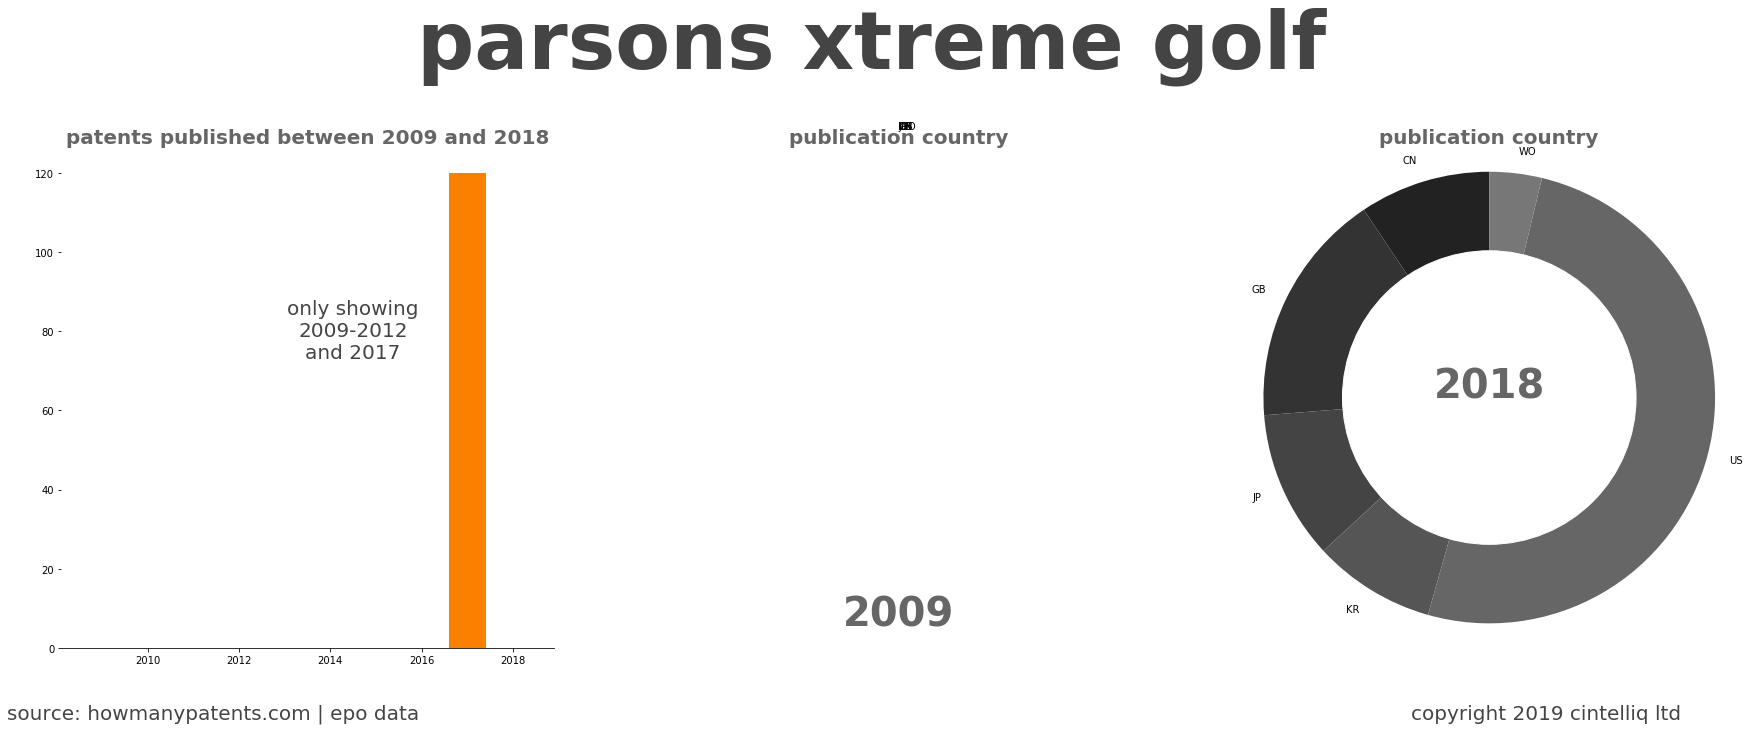 summary of patents for Parsons Xtreme Golf